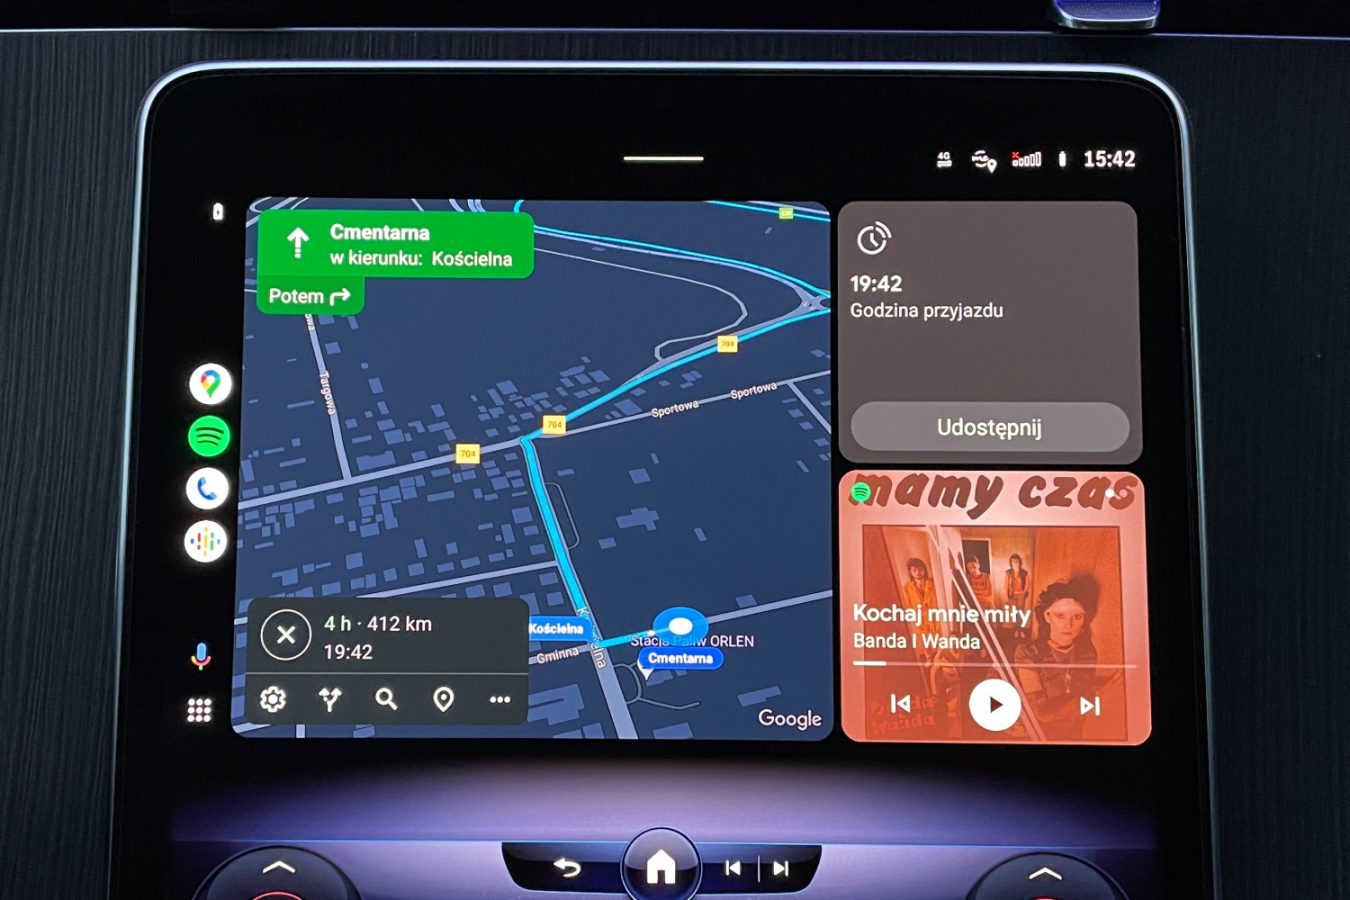 Nowy Android Auto beta test